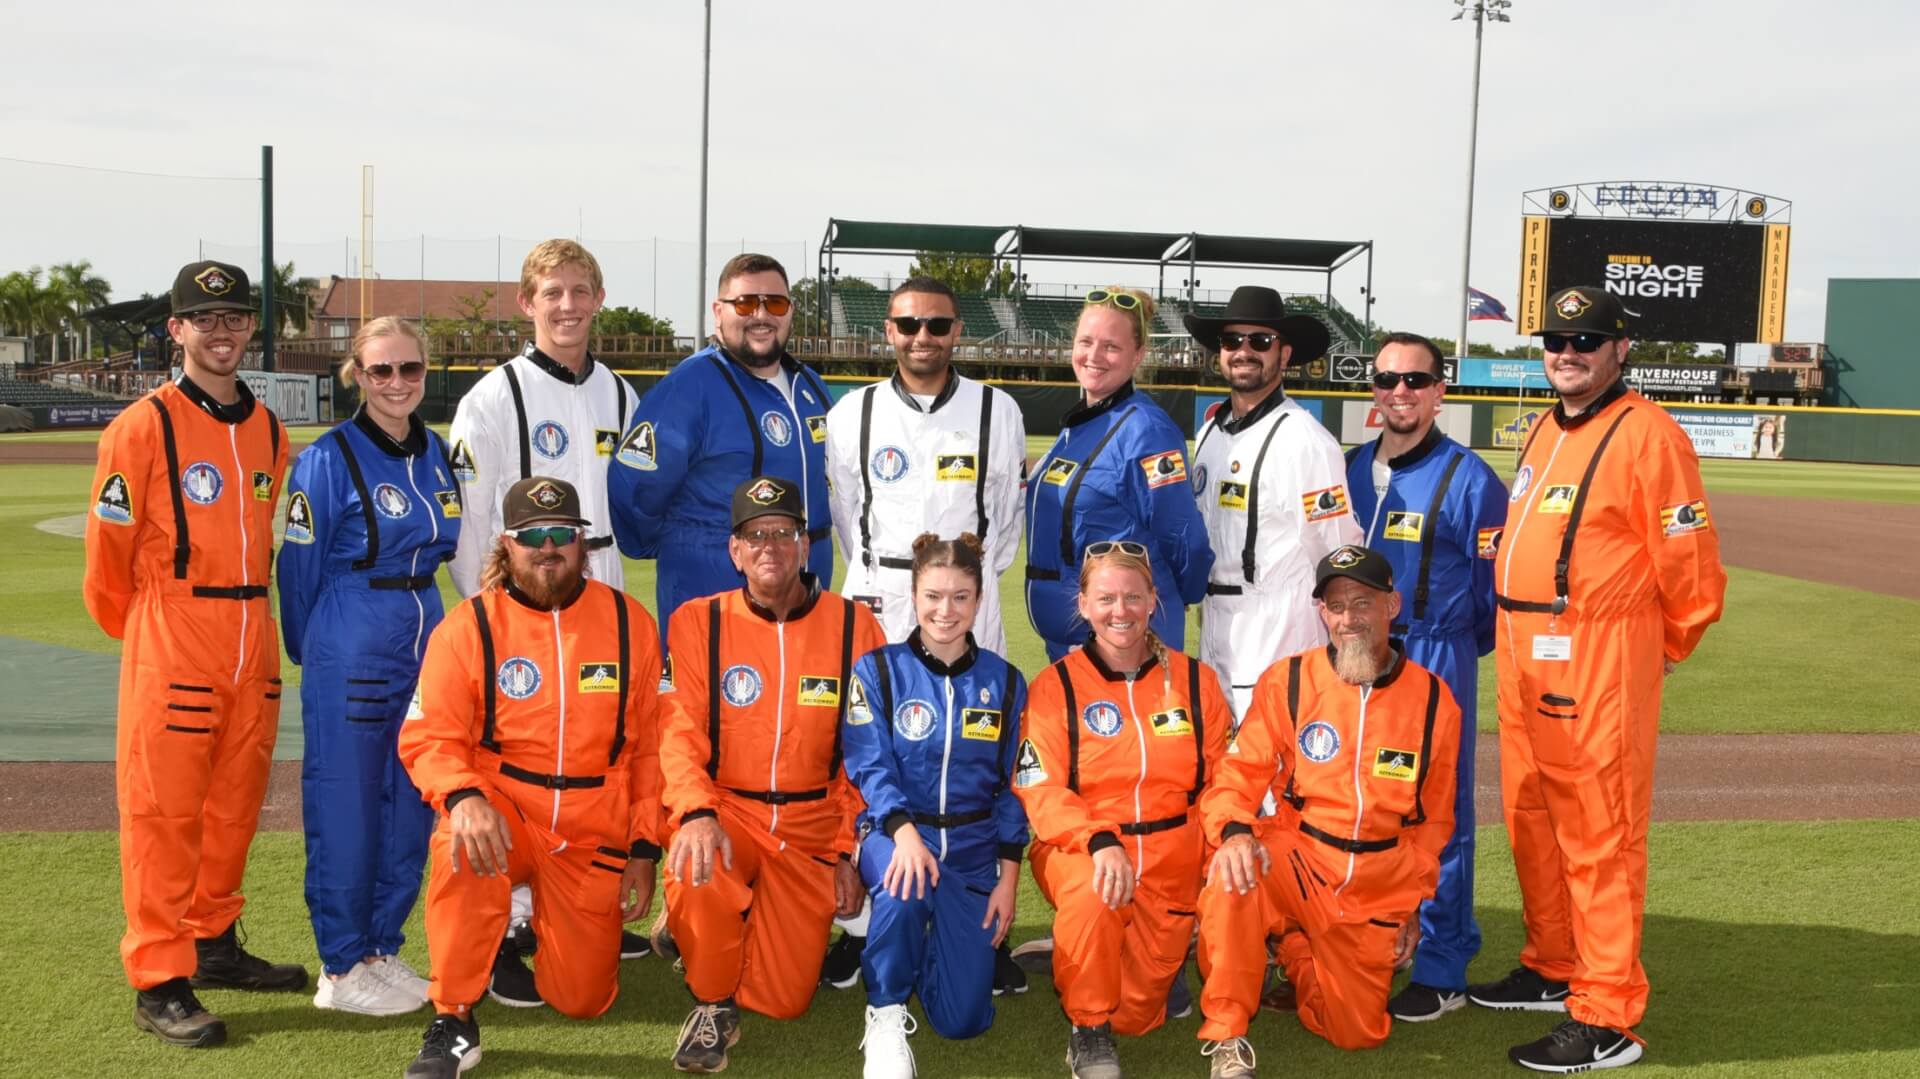 Bradenton Marauders game attendees on the field in astronaut suits